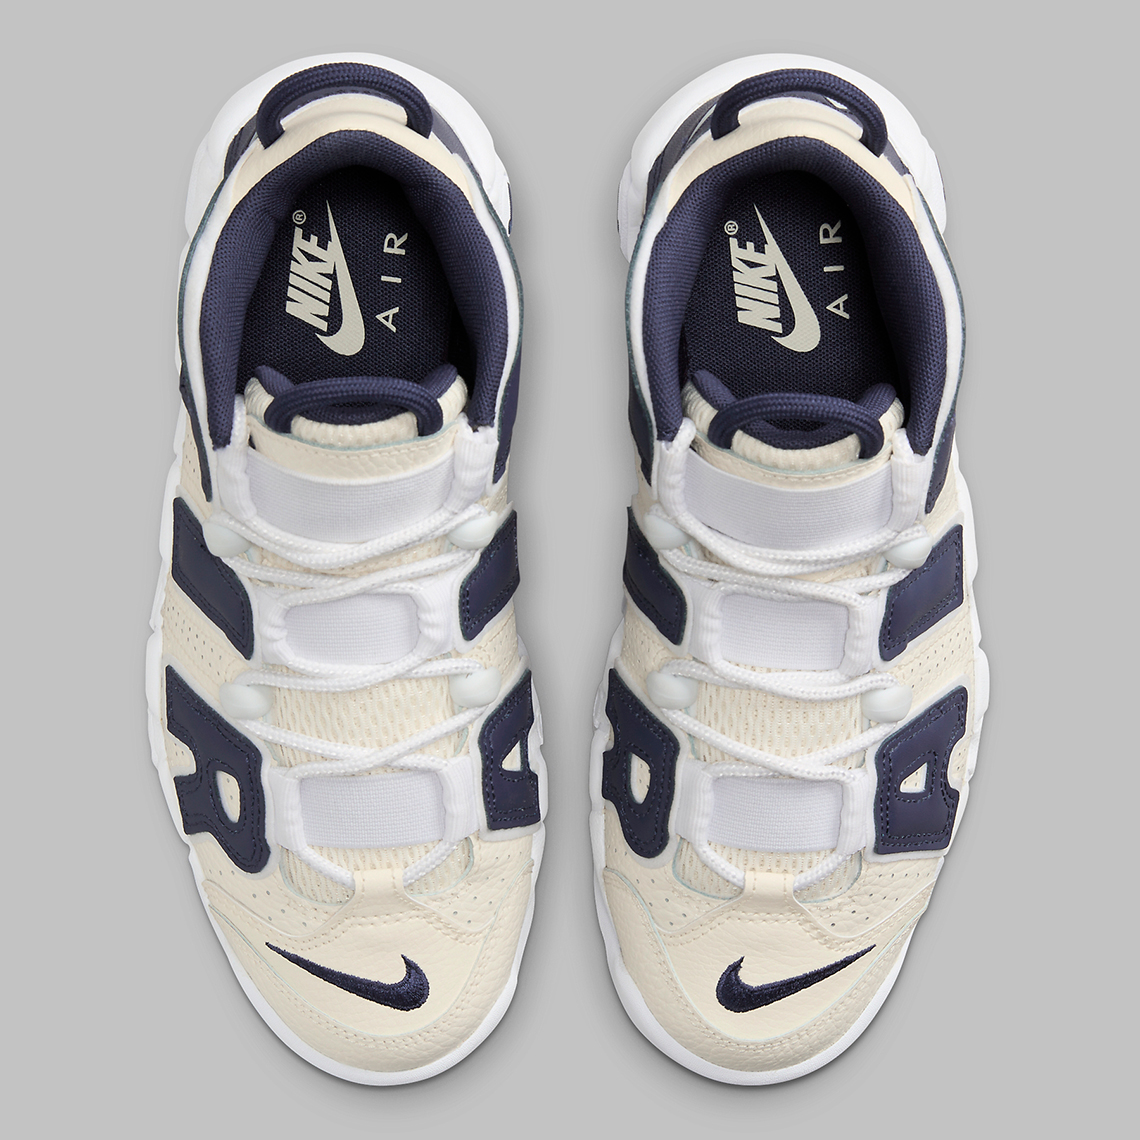 Nike Air More Uptempo Coconut Milk Navy Fq2762 100 4